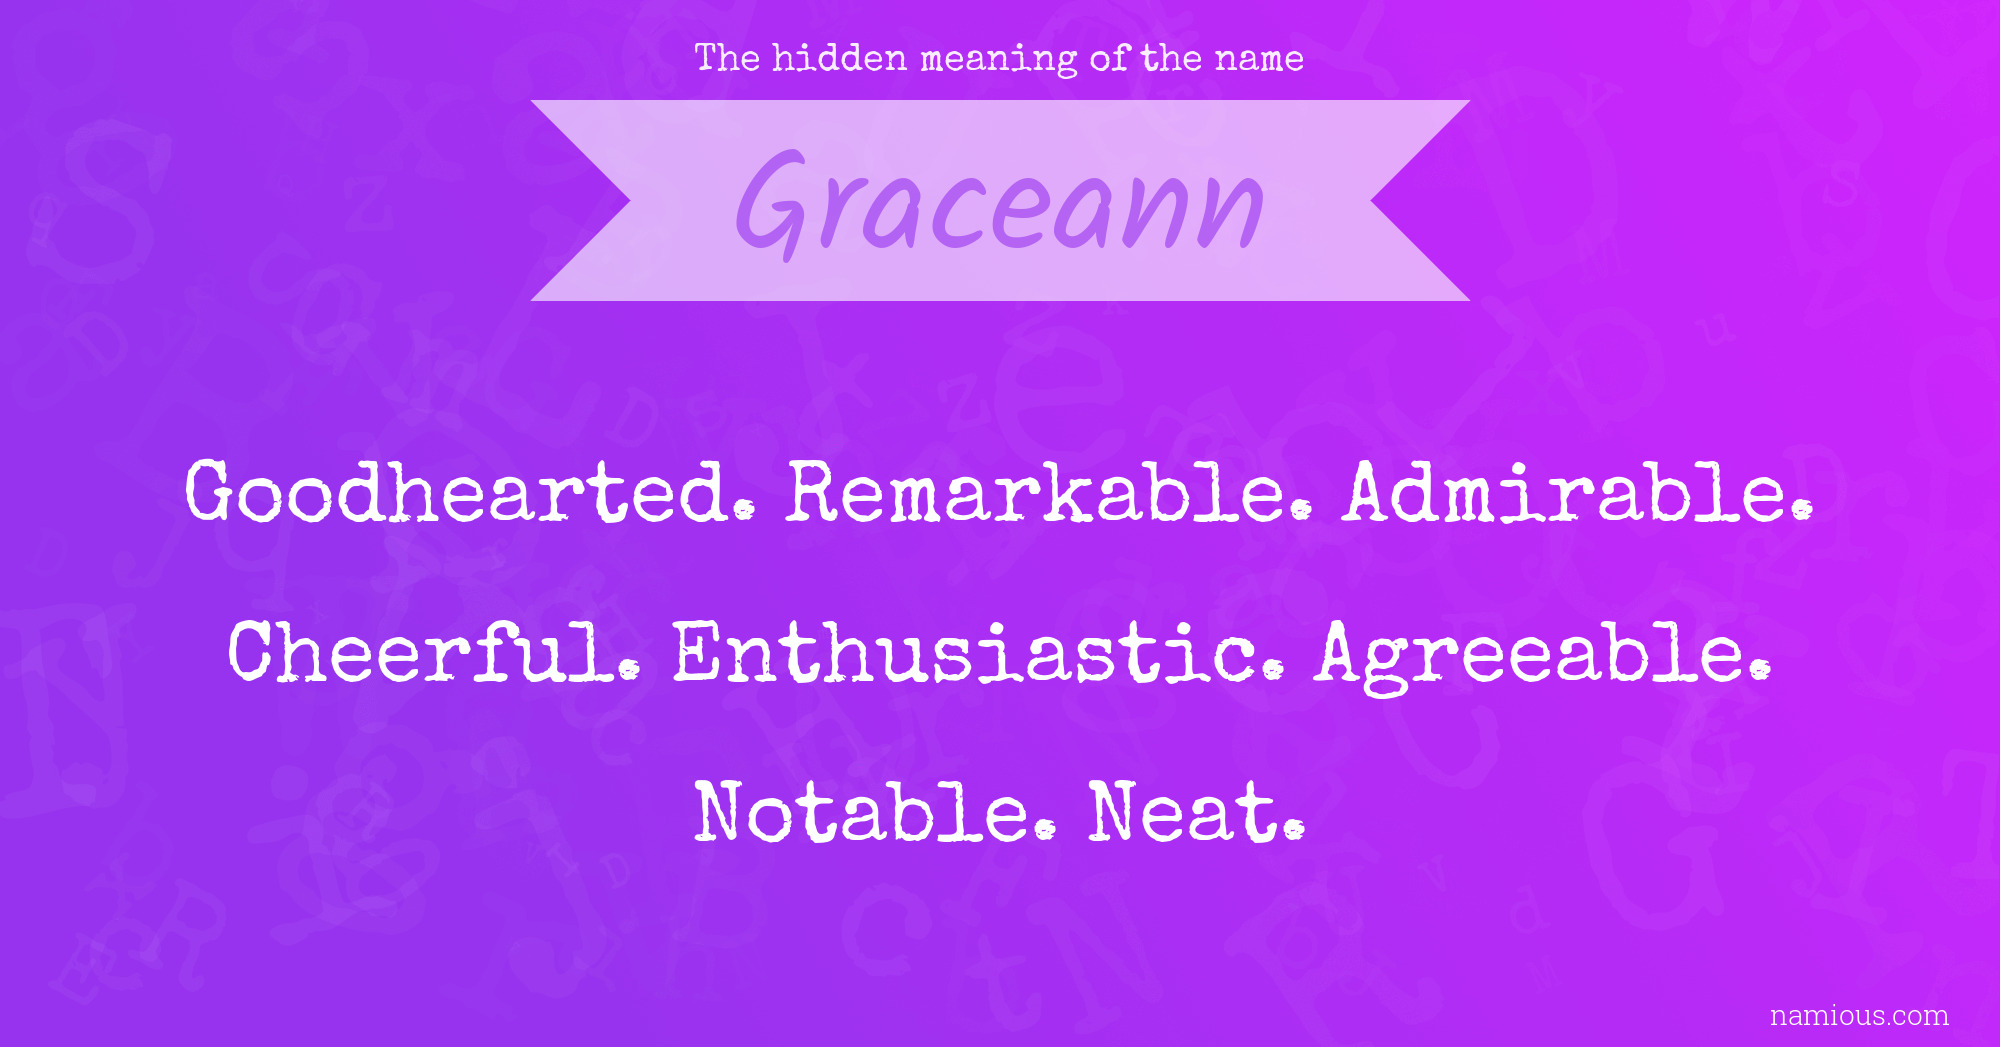 The hidden meaning of the name Graceann